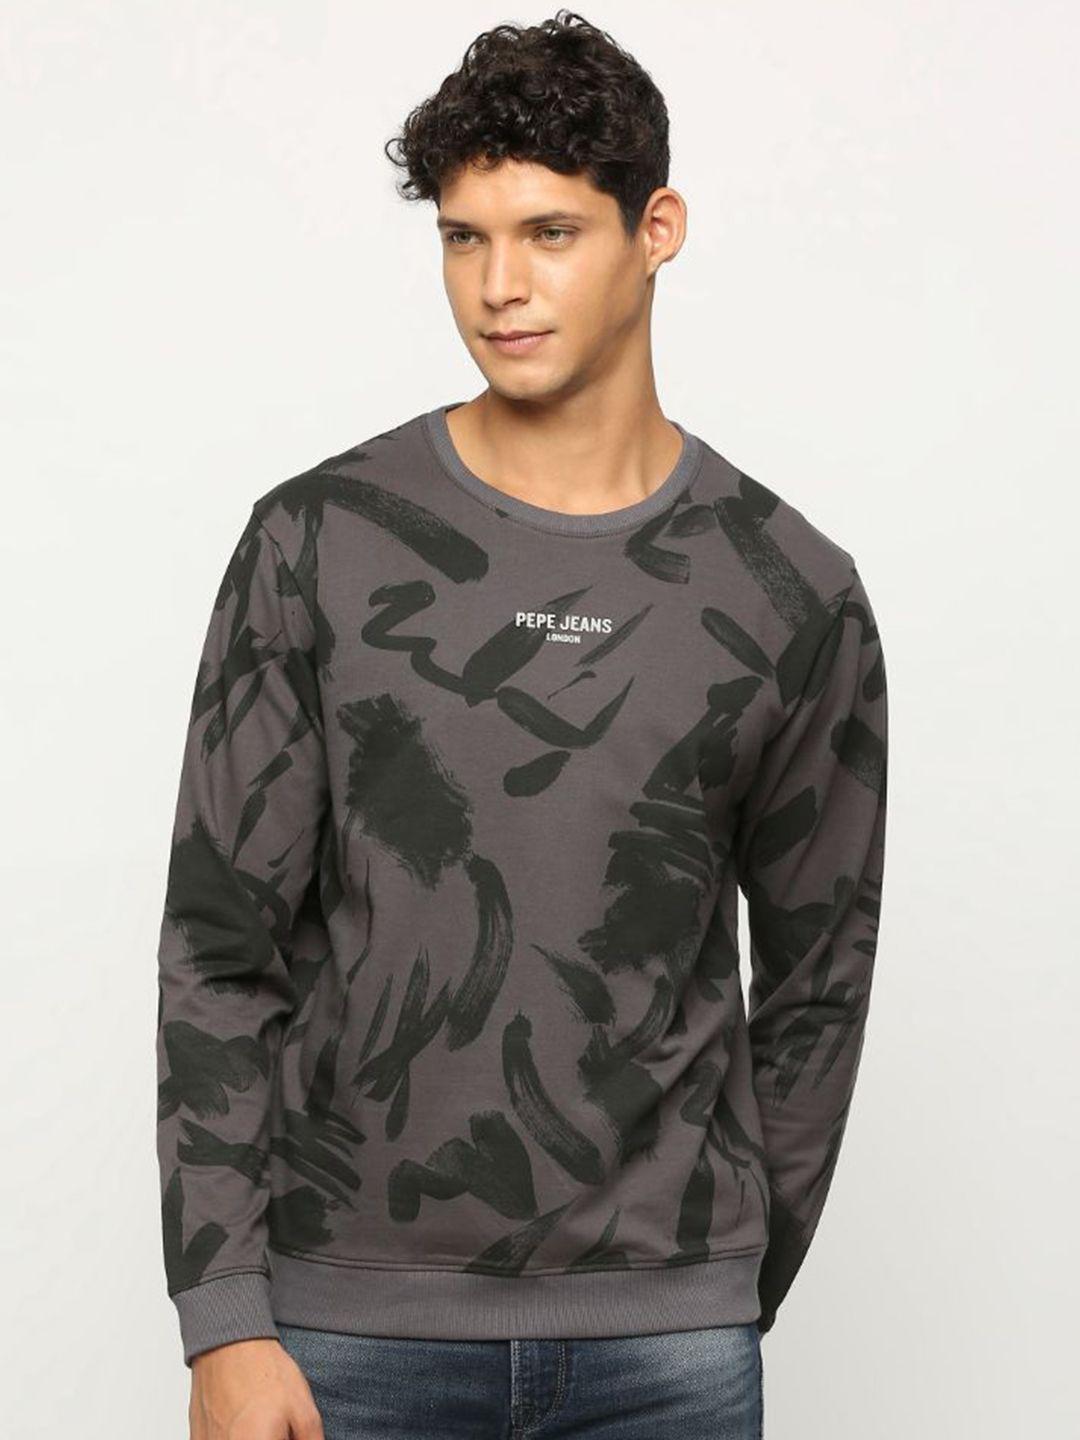 pepe jeans abstract printed cotton sweatshirt